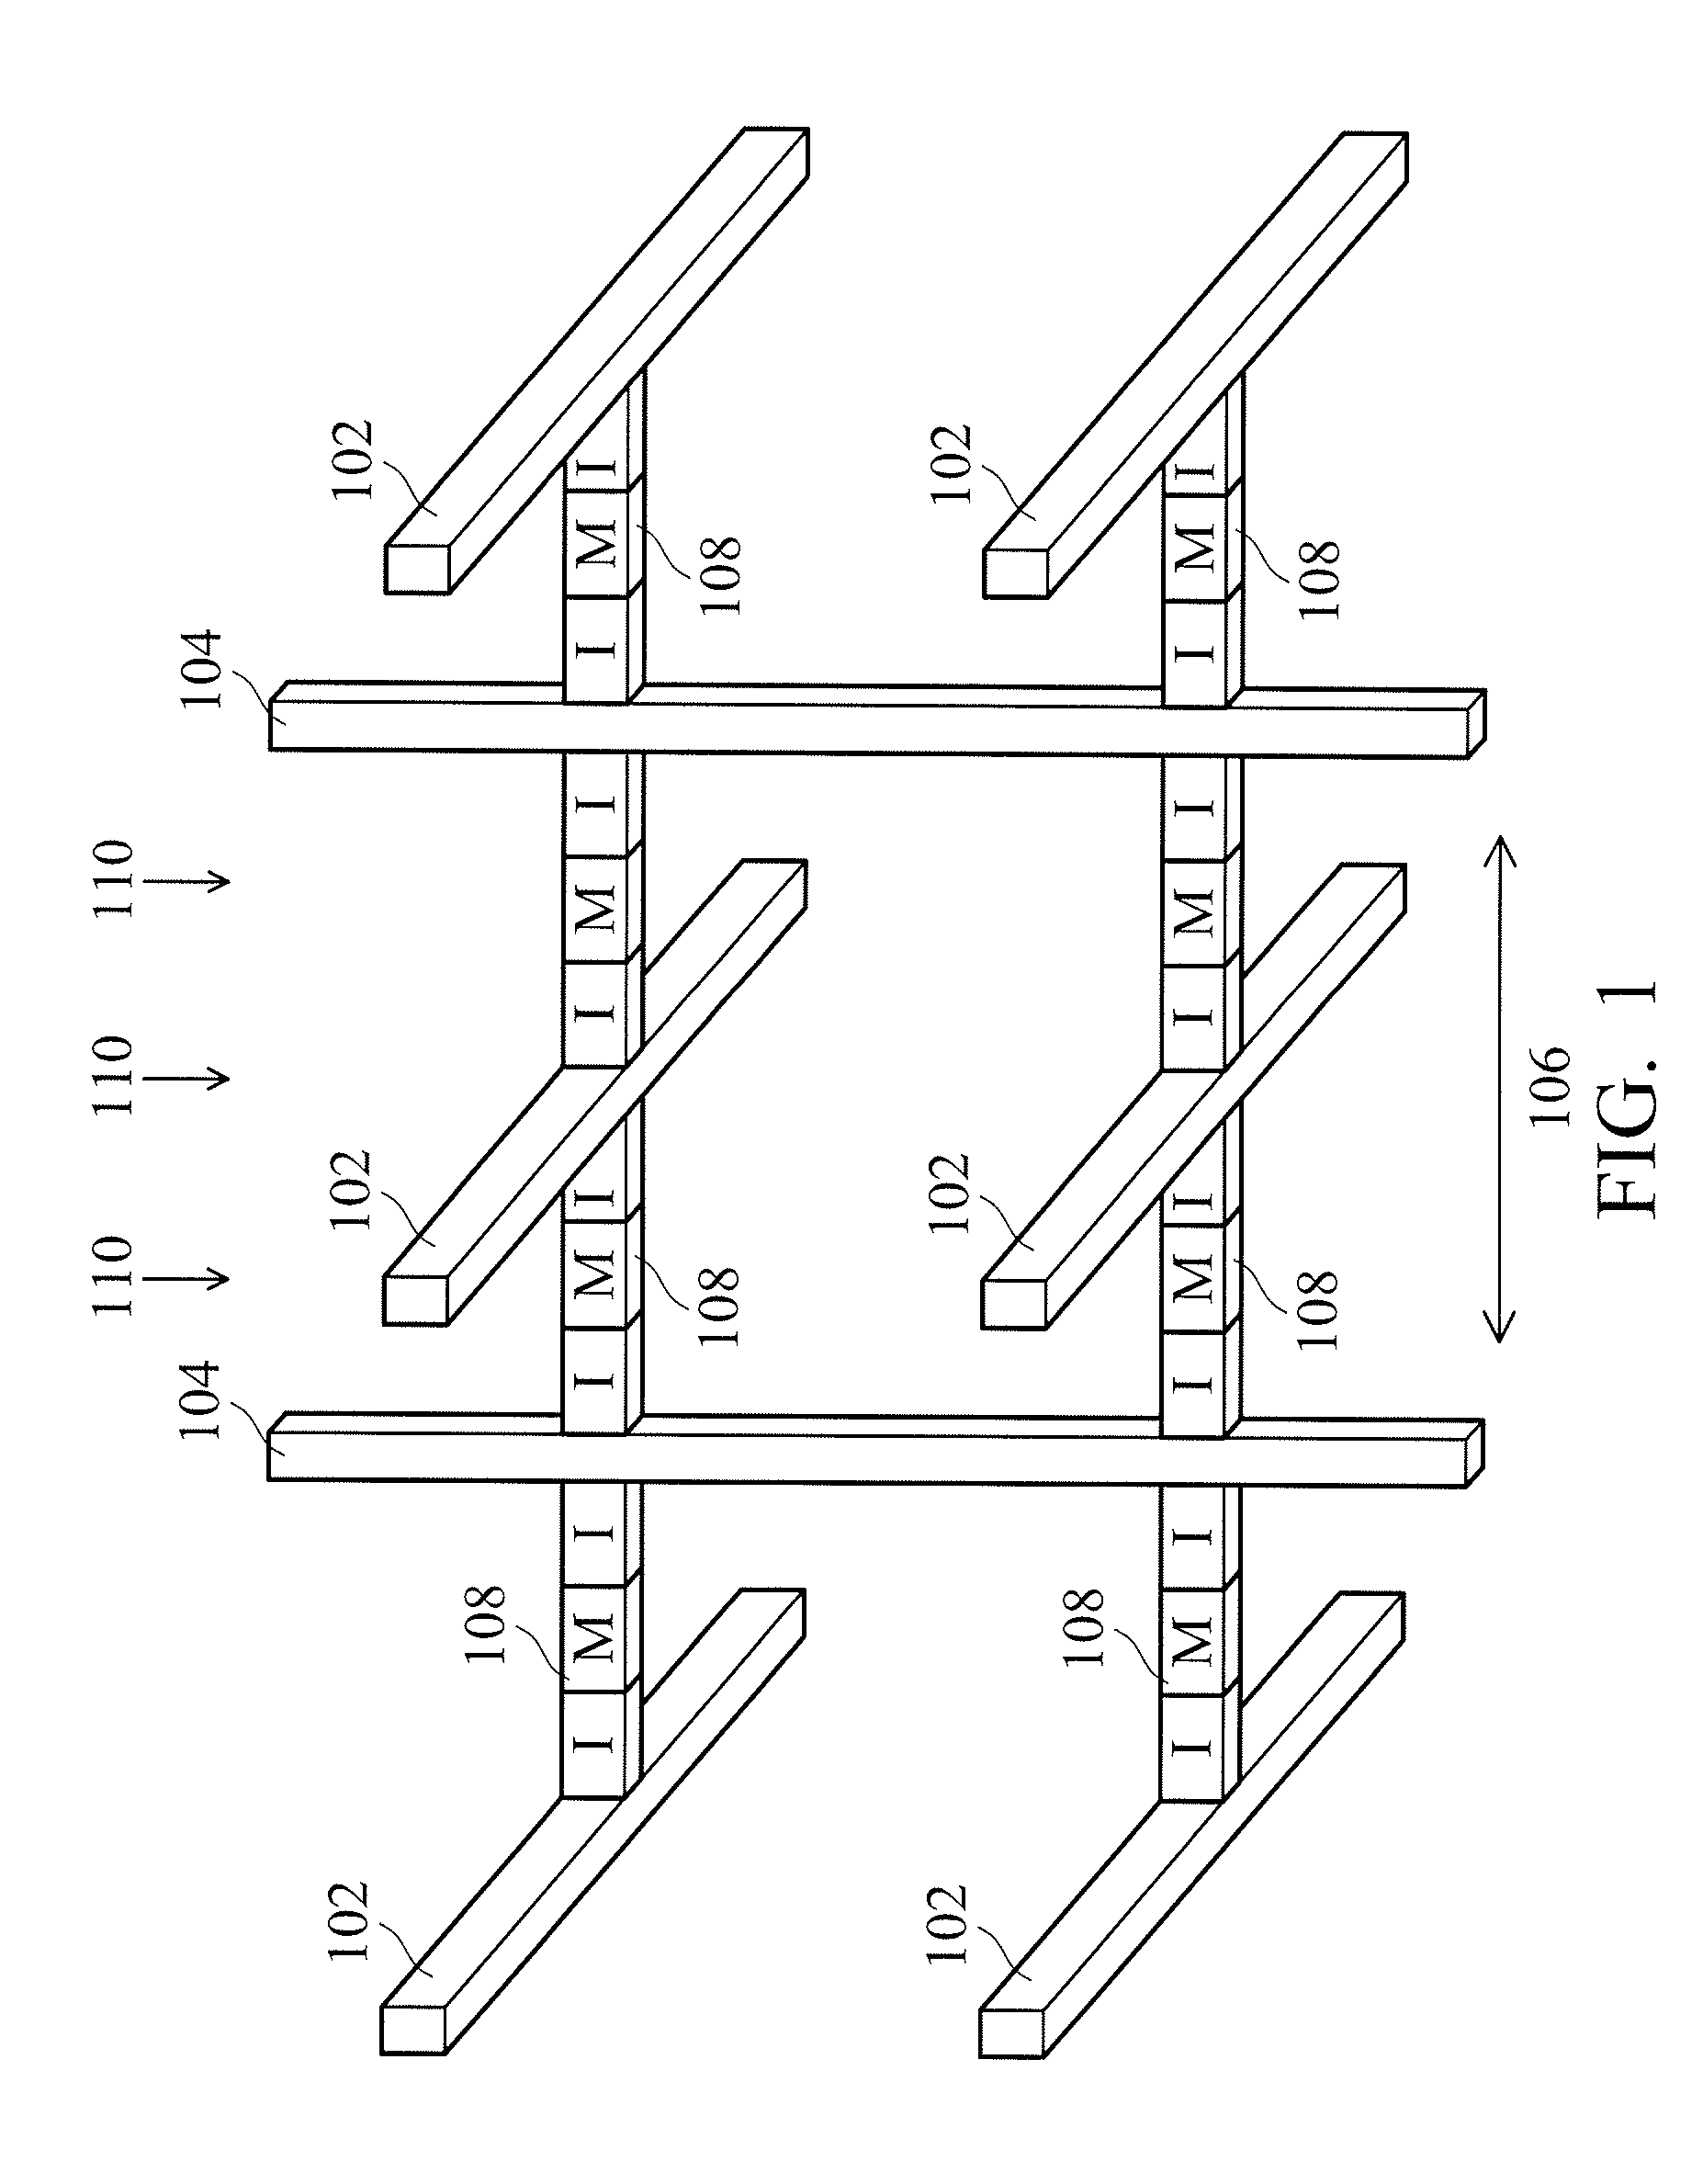 Self-rectifying rram cell structure and rram 3D crossbar array architecture